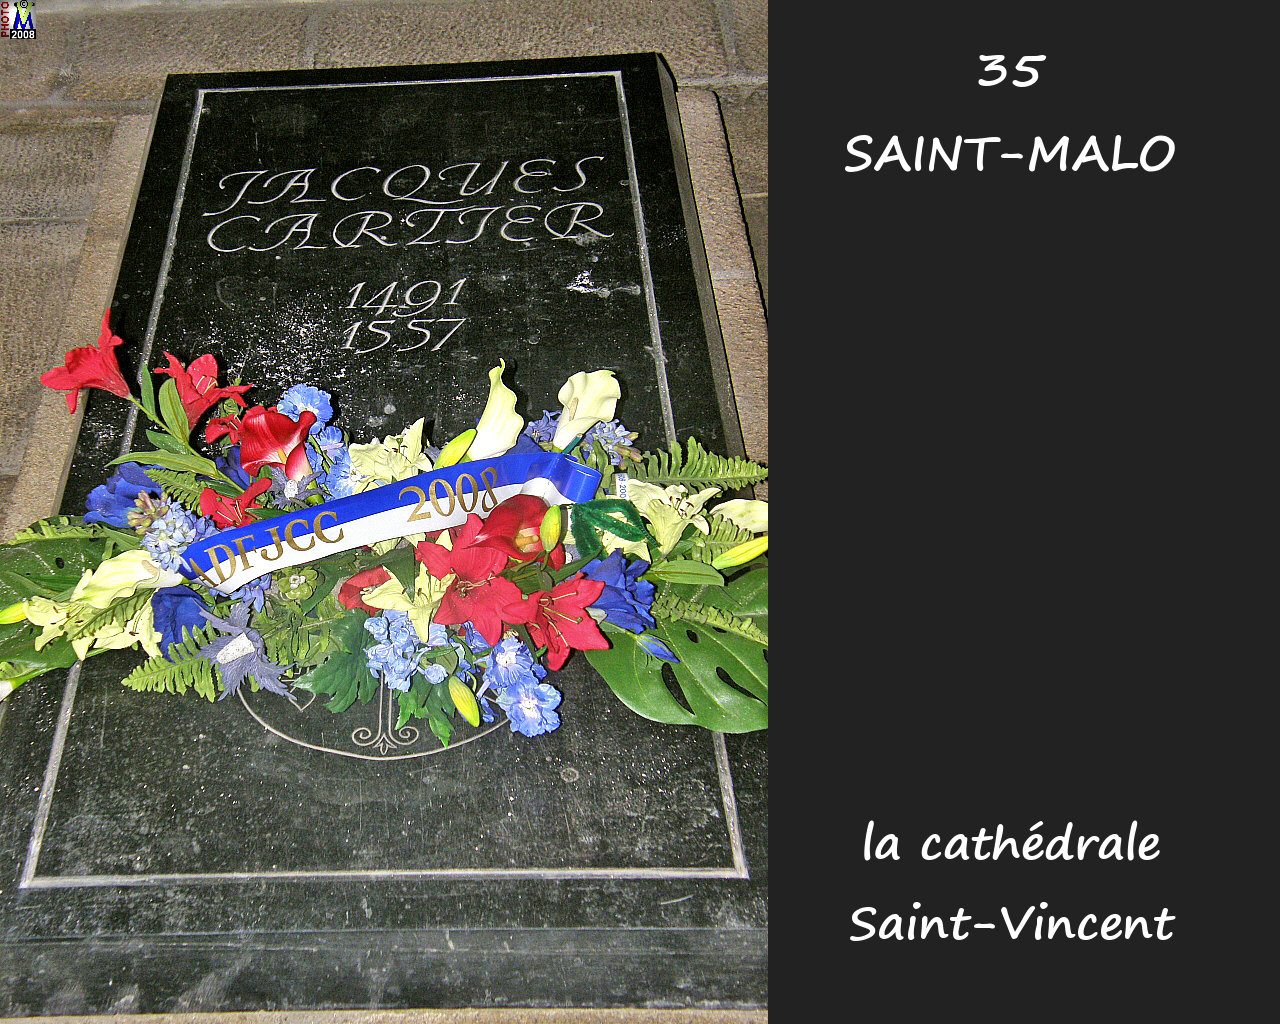 35StMALO_cathedrale_270.jpg